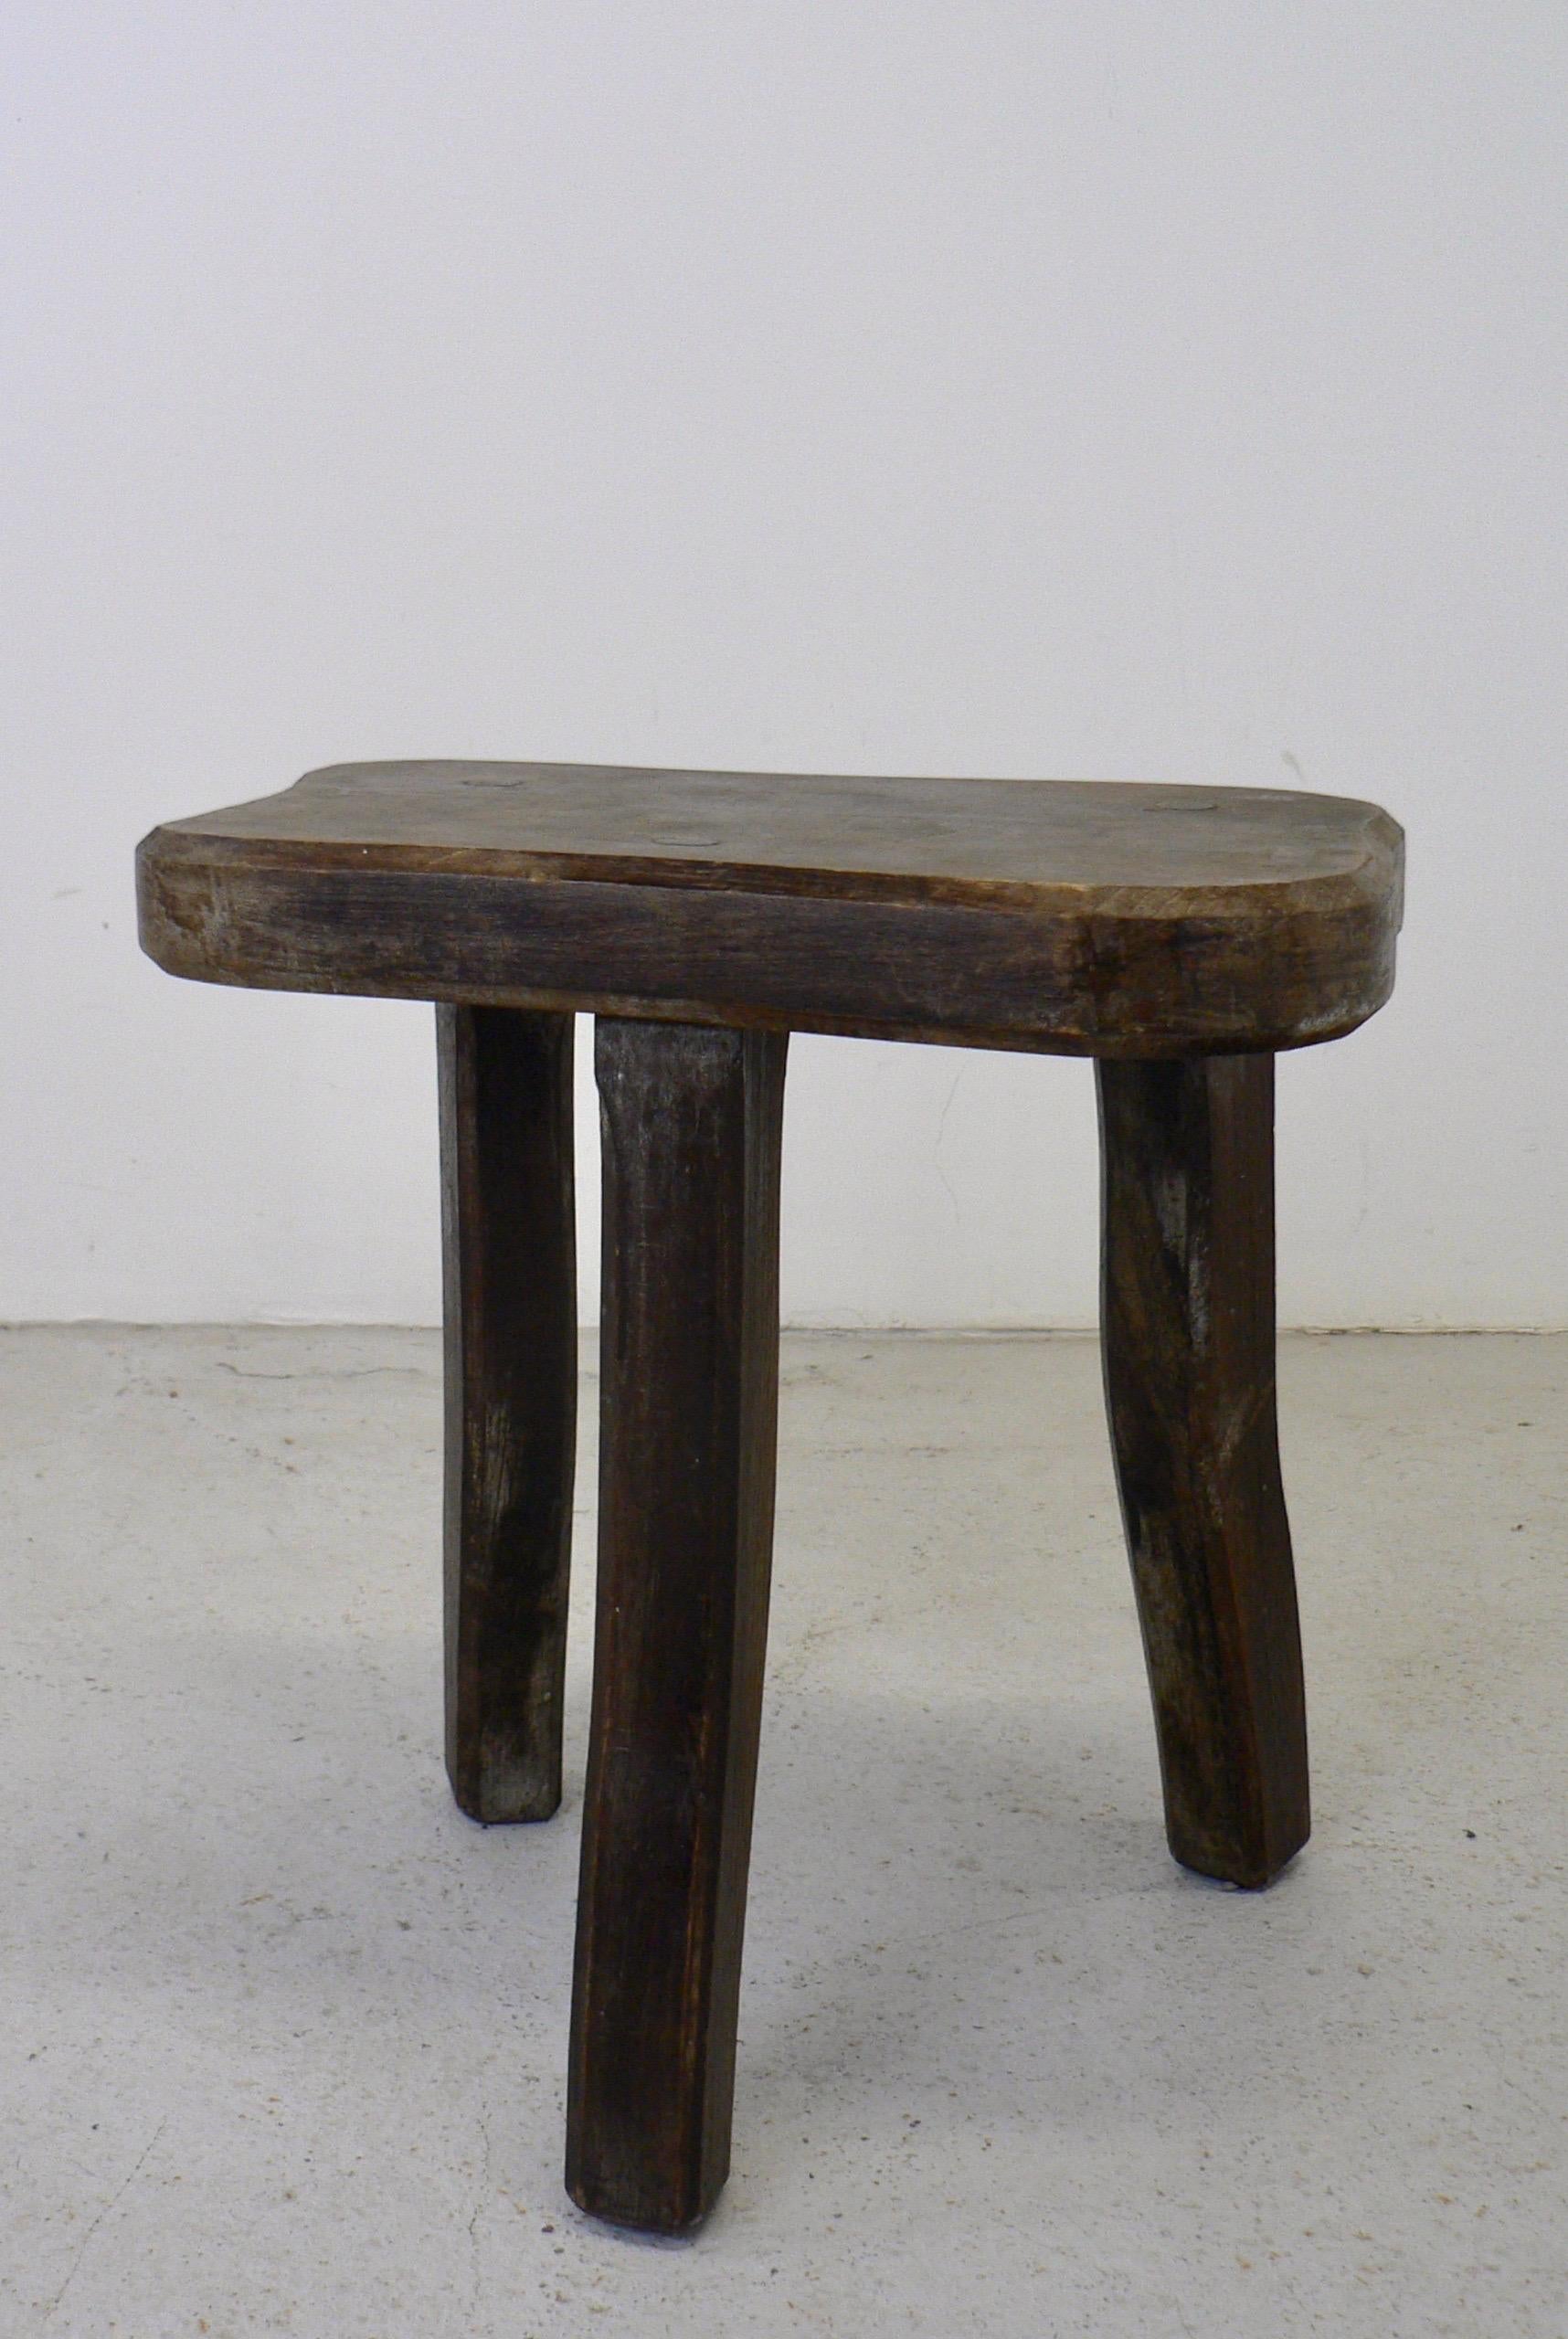 A tripod shepherd's stool with a free-form seat. Rustic French craftsmanship in solid oak from the early 20th century. Beautiful patina.
